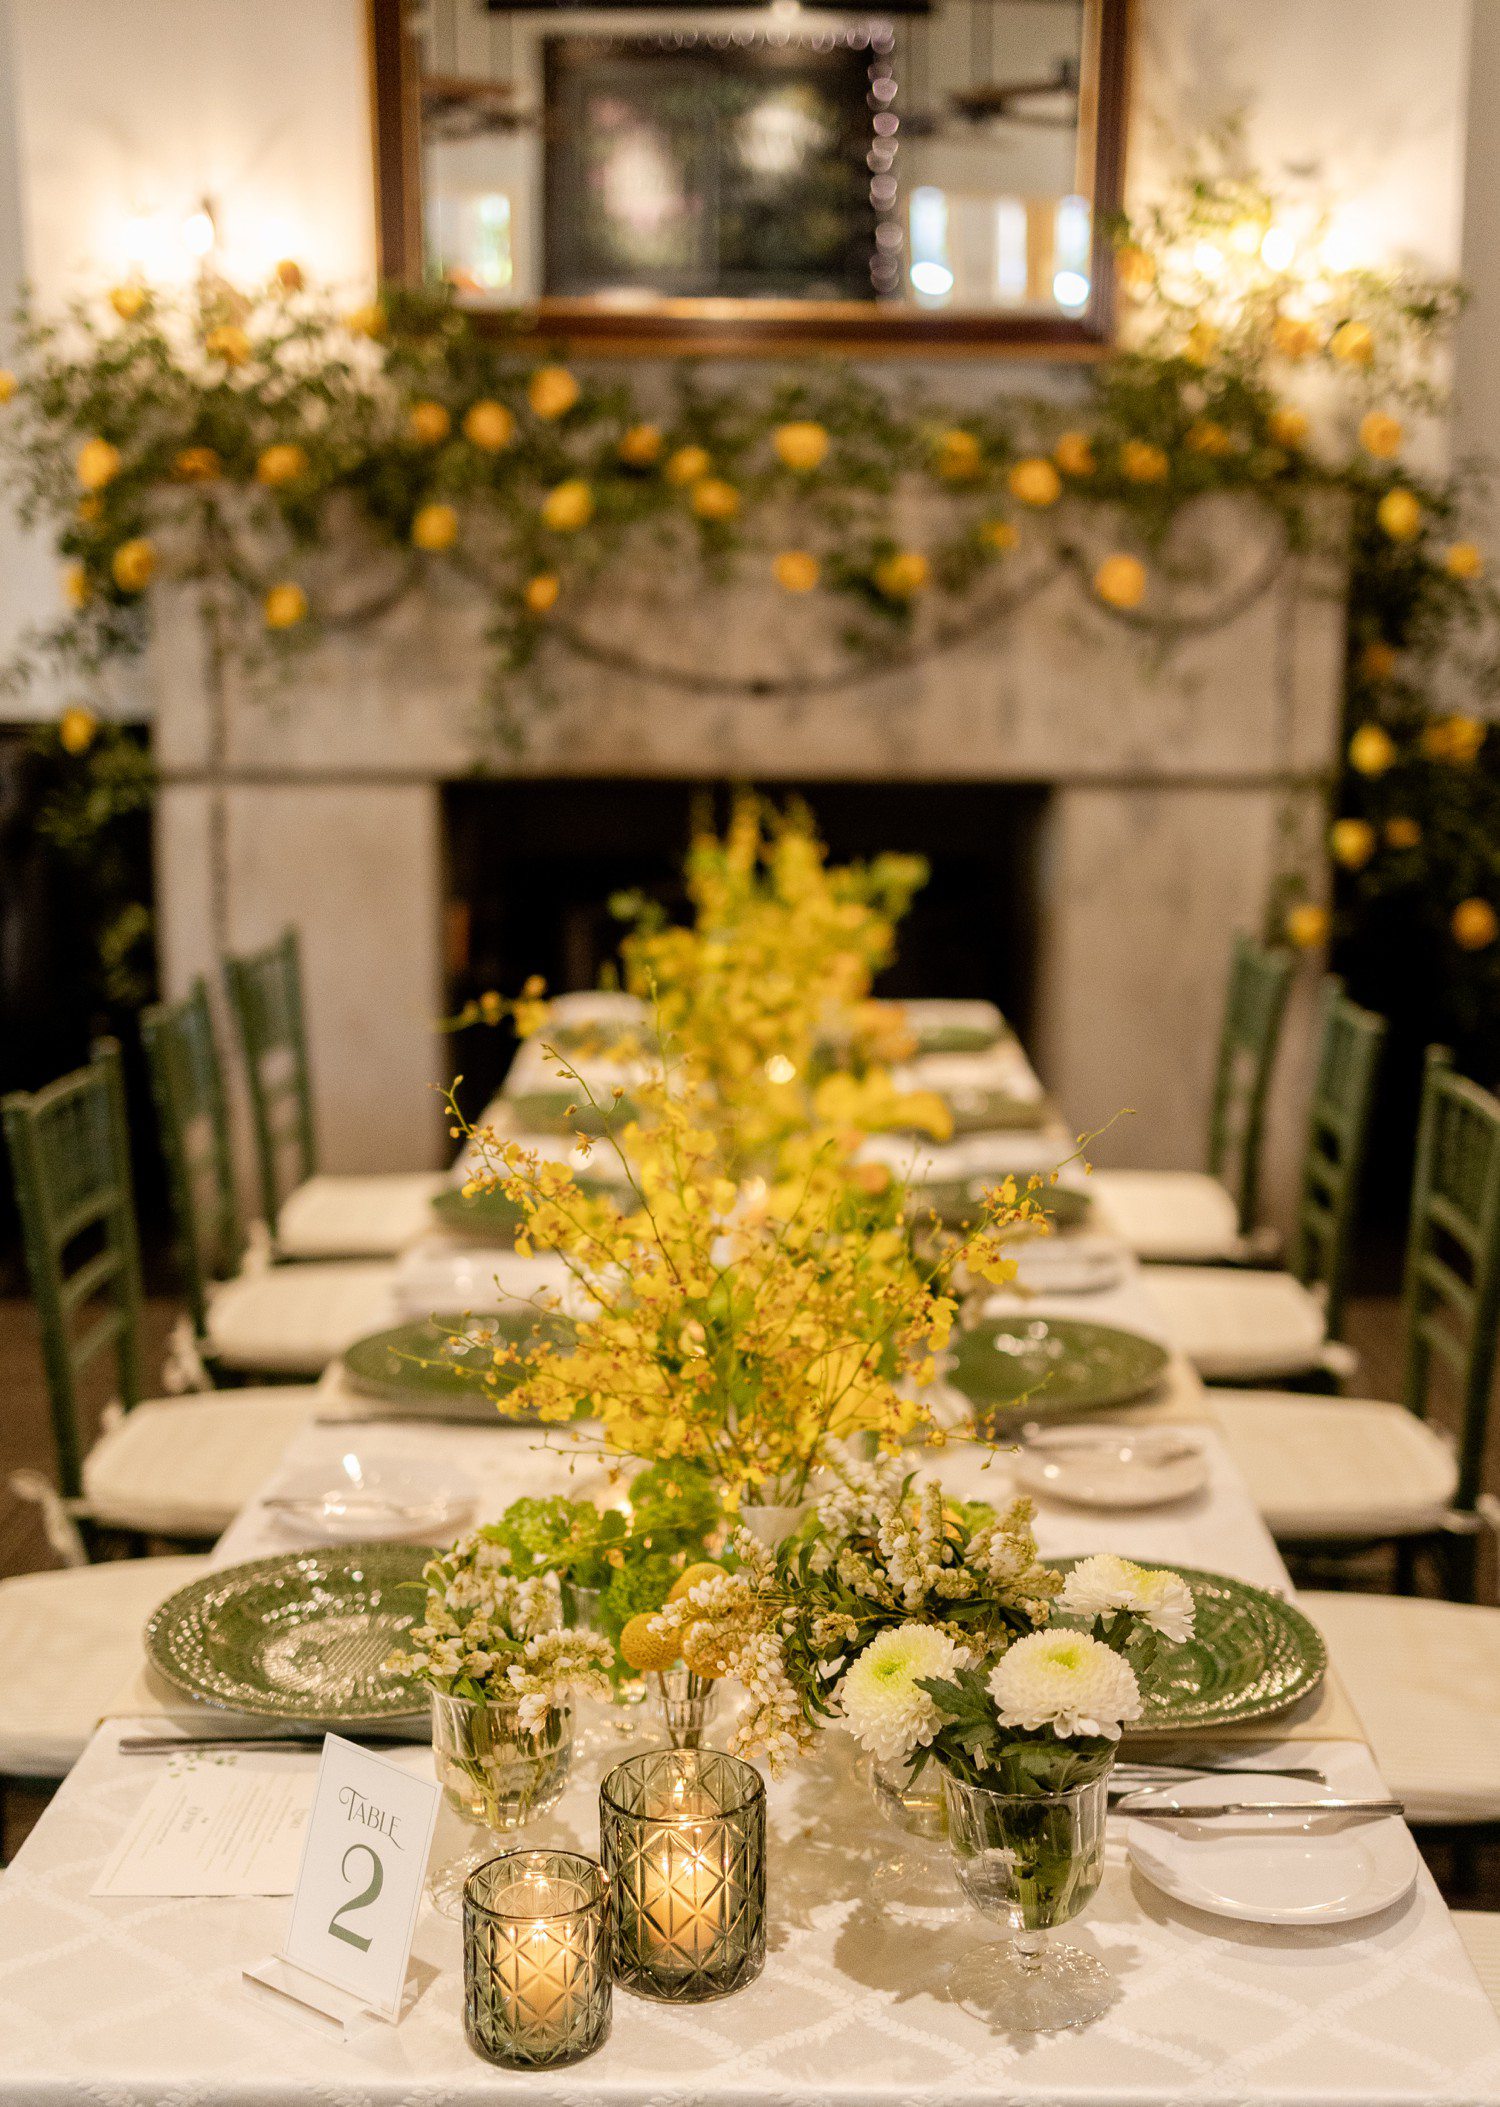 Yellow flowers decorating table for rehearsal dinner at Ousie's in Houston.